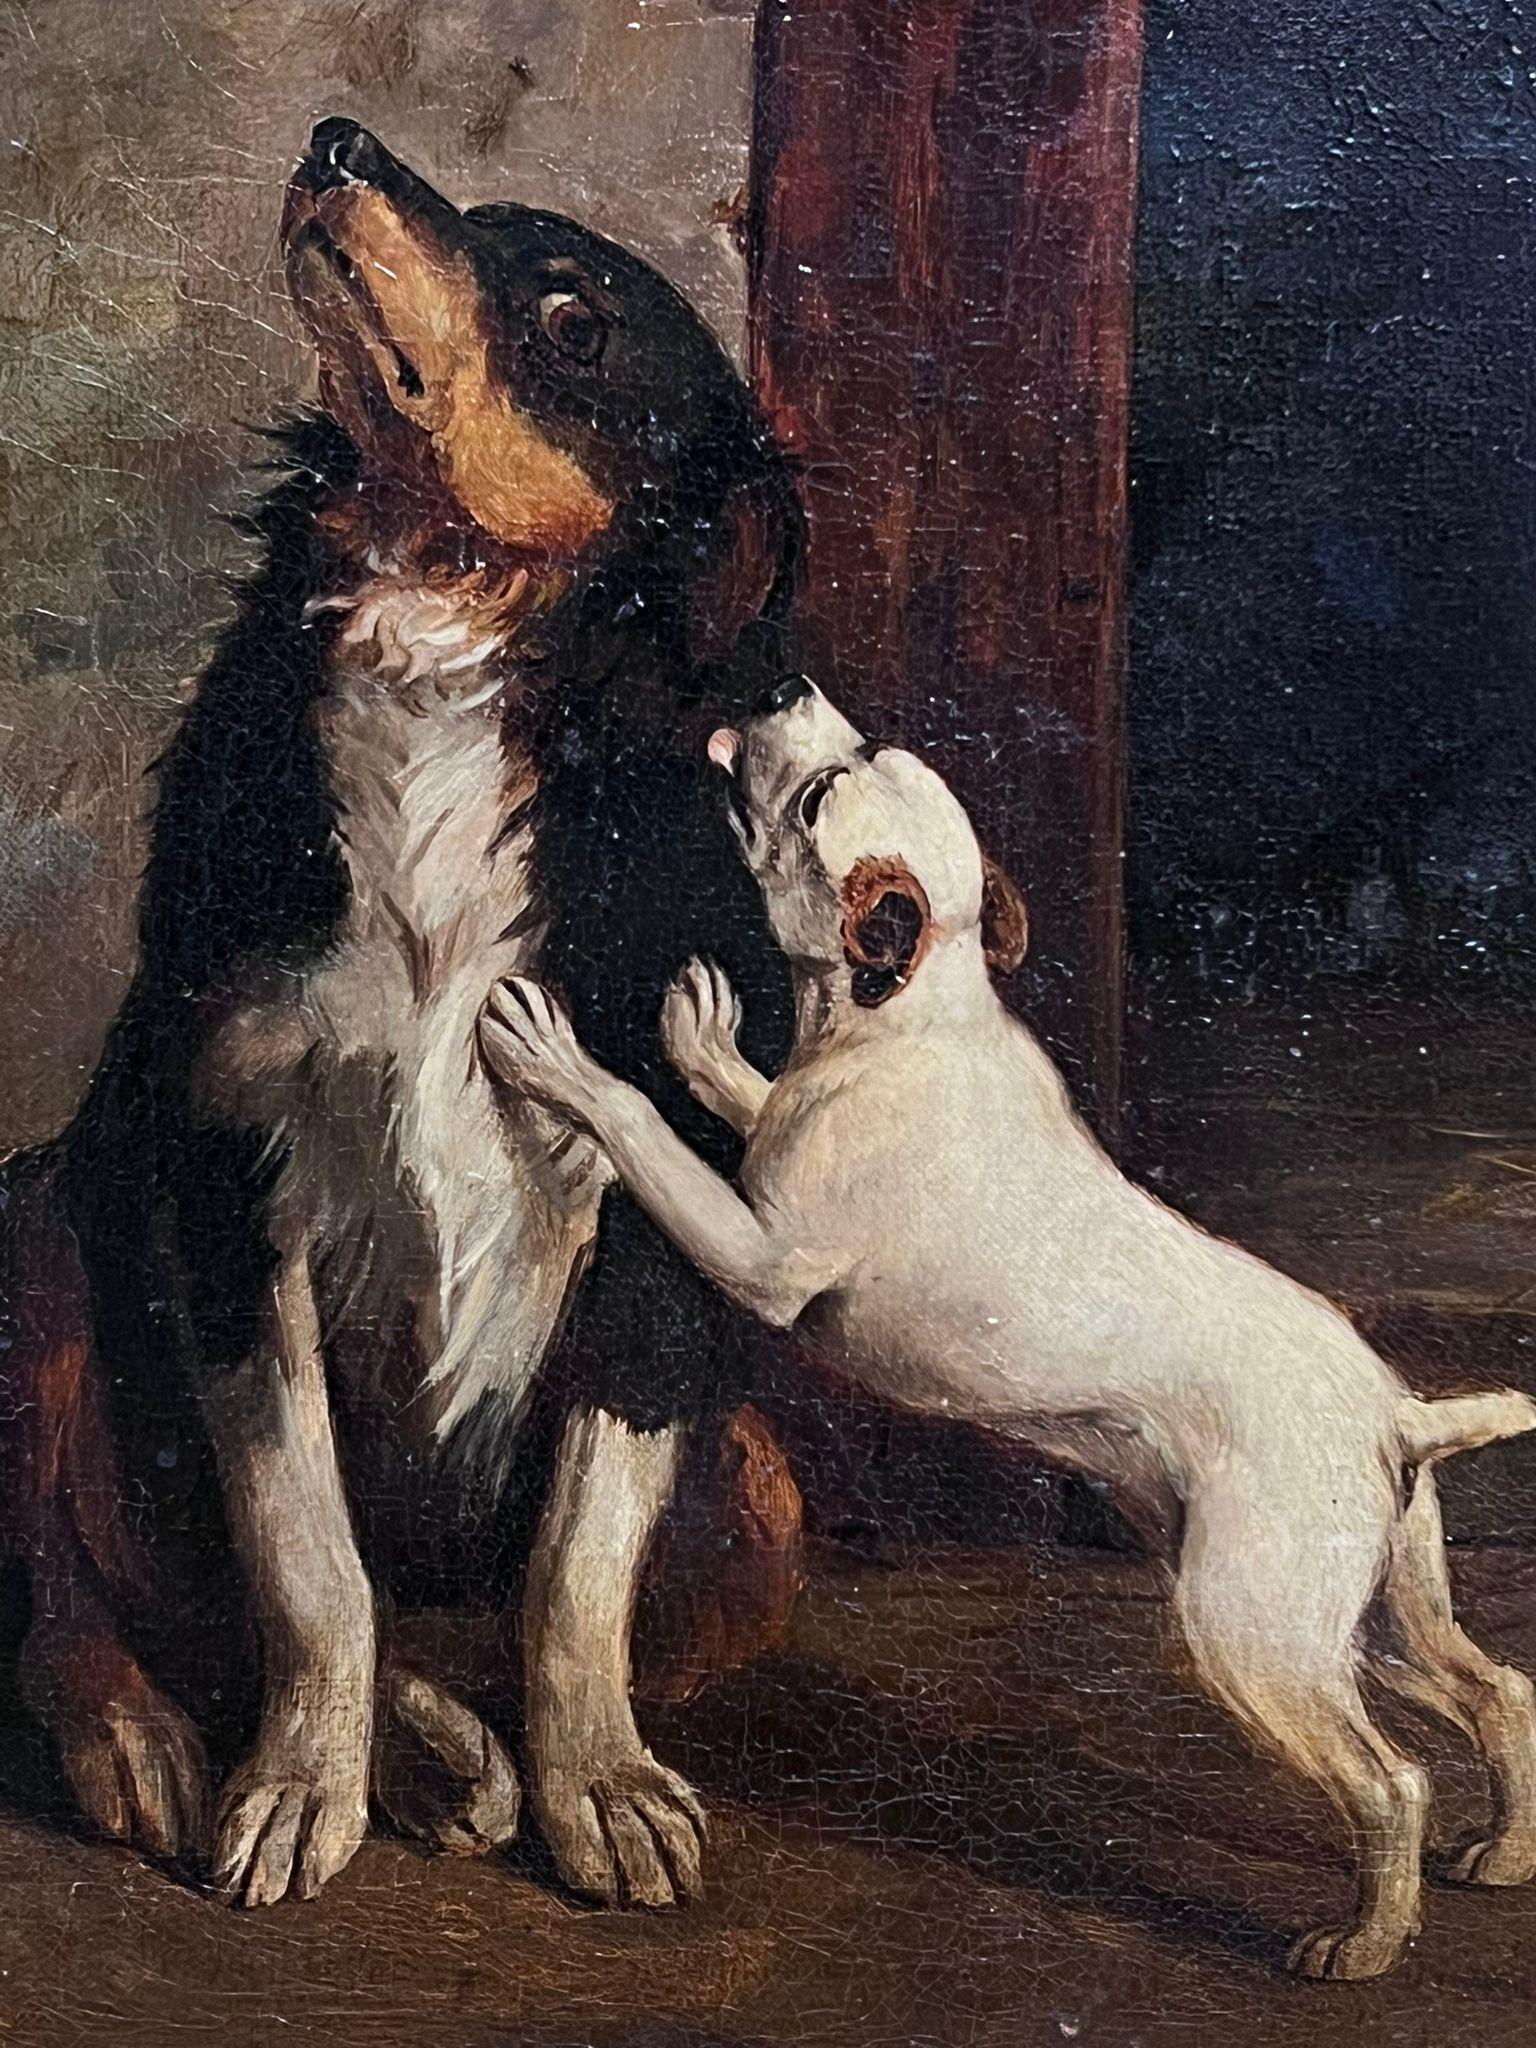 The Young Puppy
British School, 19th century
indistinctly signed with a monogram
oil on canvas, framed
framed: 18.5 x 21 inches
canvas: 14 x 16 inches
provenance: private collection, UK
condition: very good and sound condition